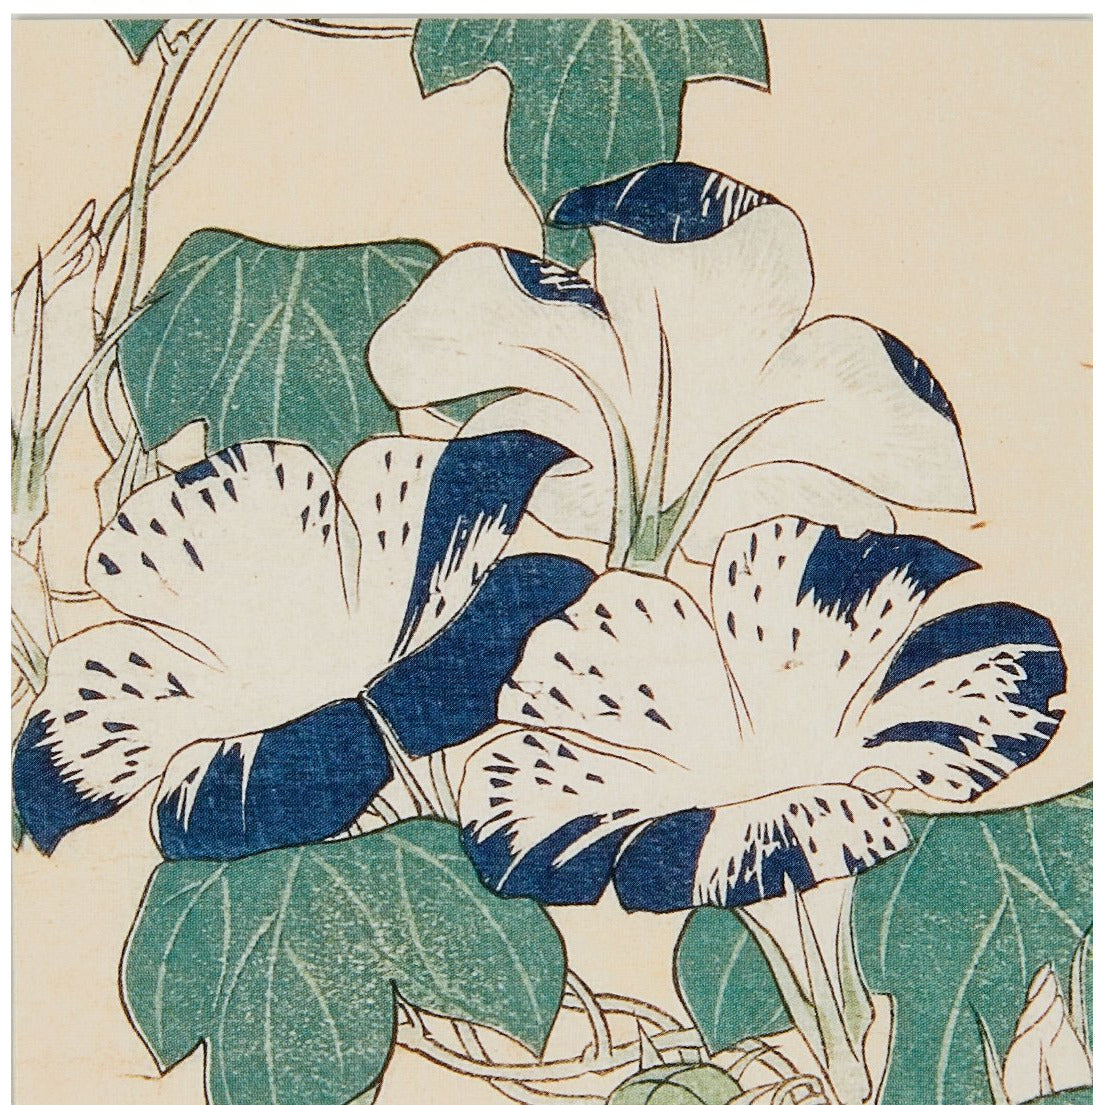 Notecard - detail from Convolvulus and tree frog by Katsushika Kokusai. From the collection of the Fitzwilliam Museum, brought to you by CuratingCambridge.co.uk